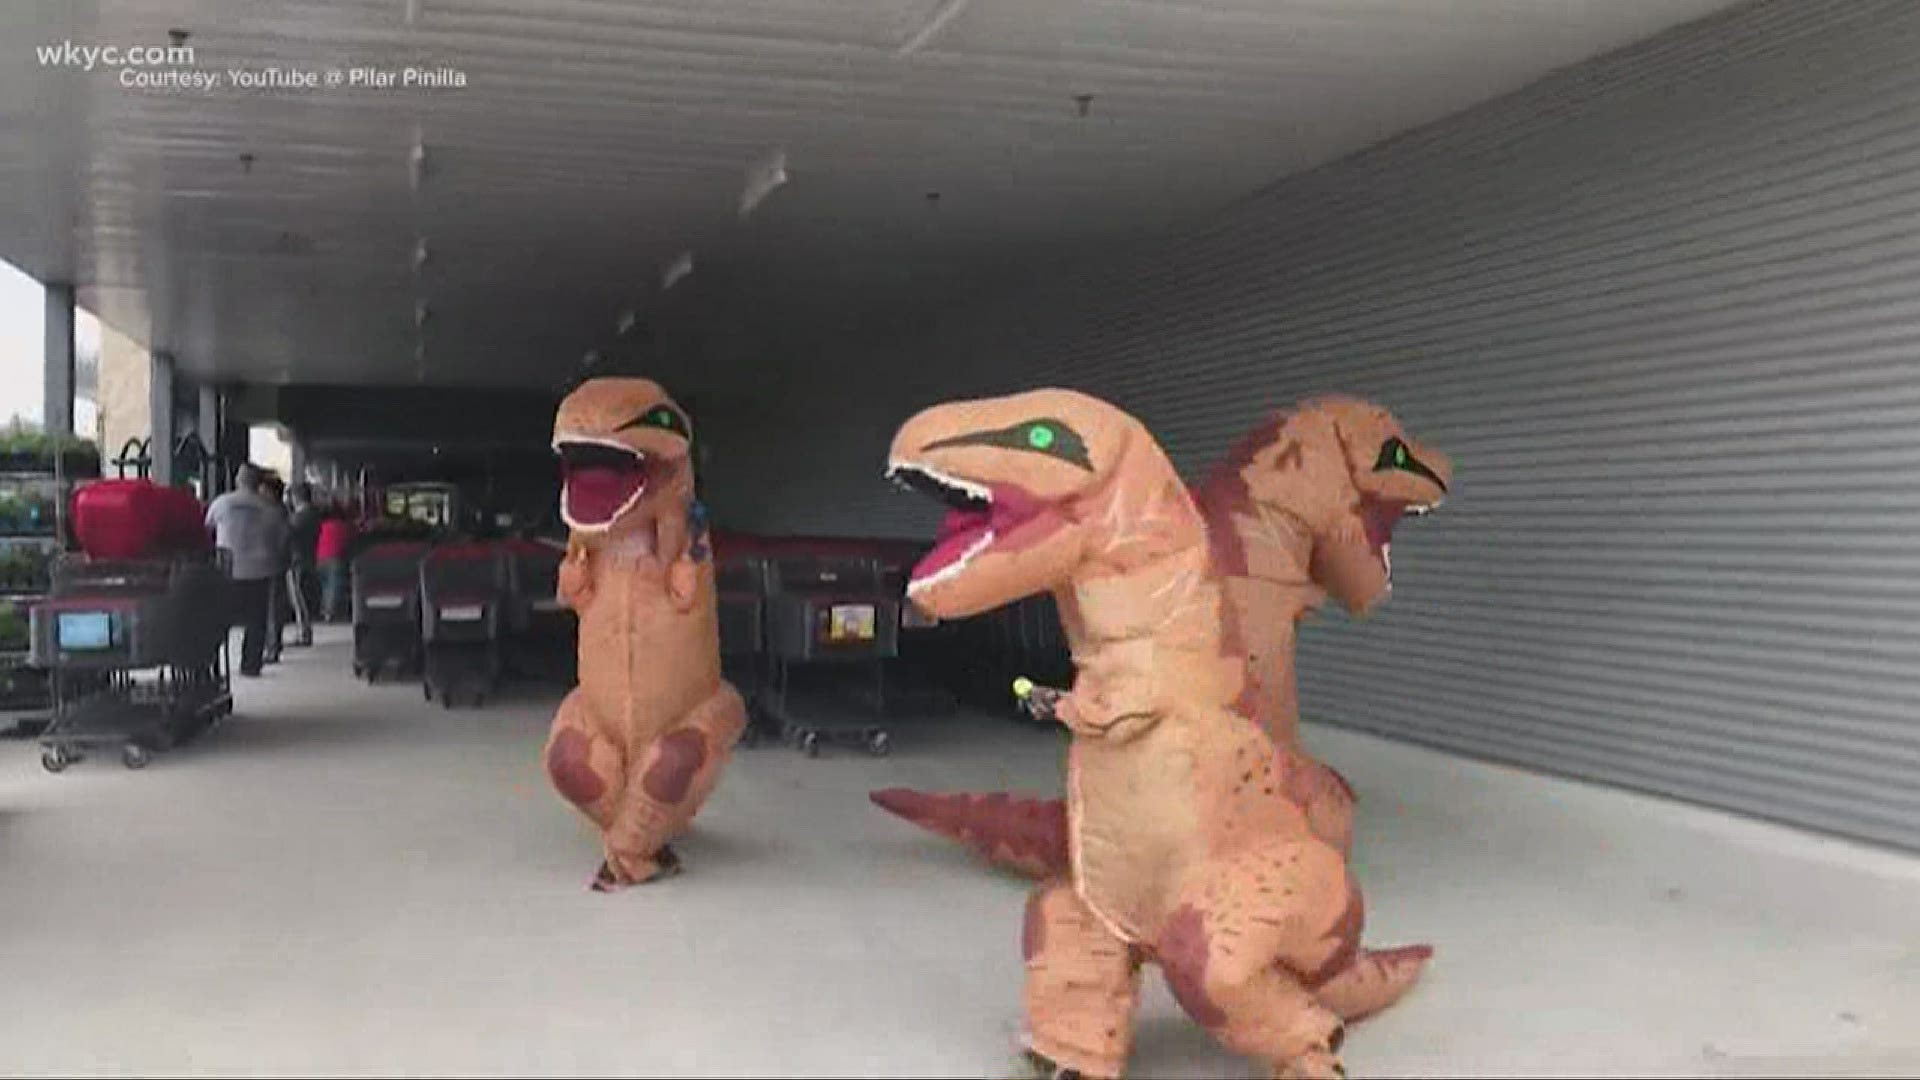 Mascot dinosaurs have been spotted around Bay Village, spreading cheer amid the coronavirus pandemic.